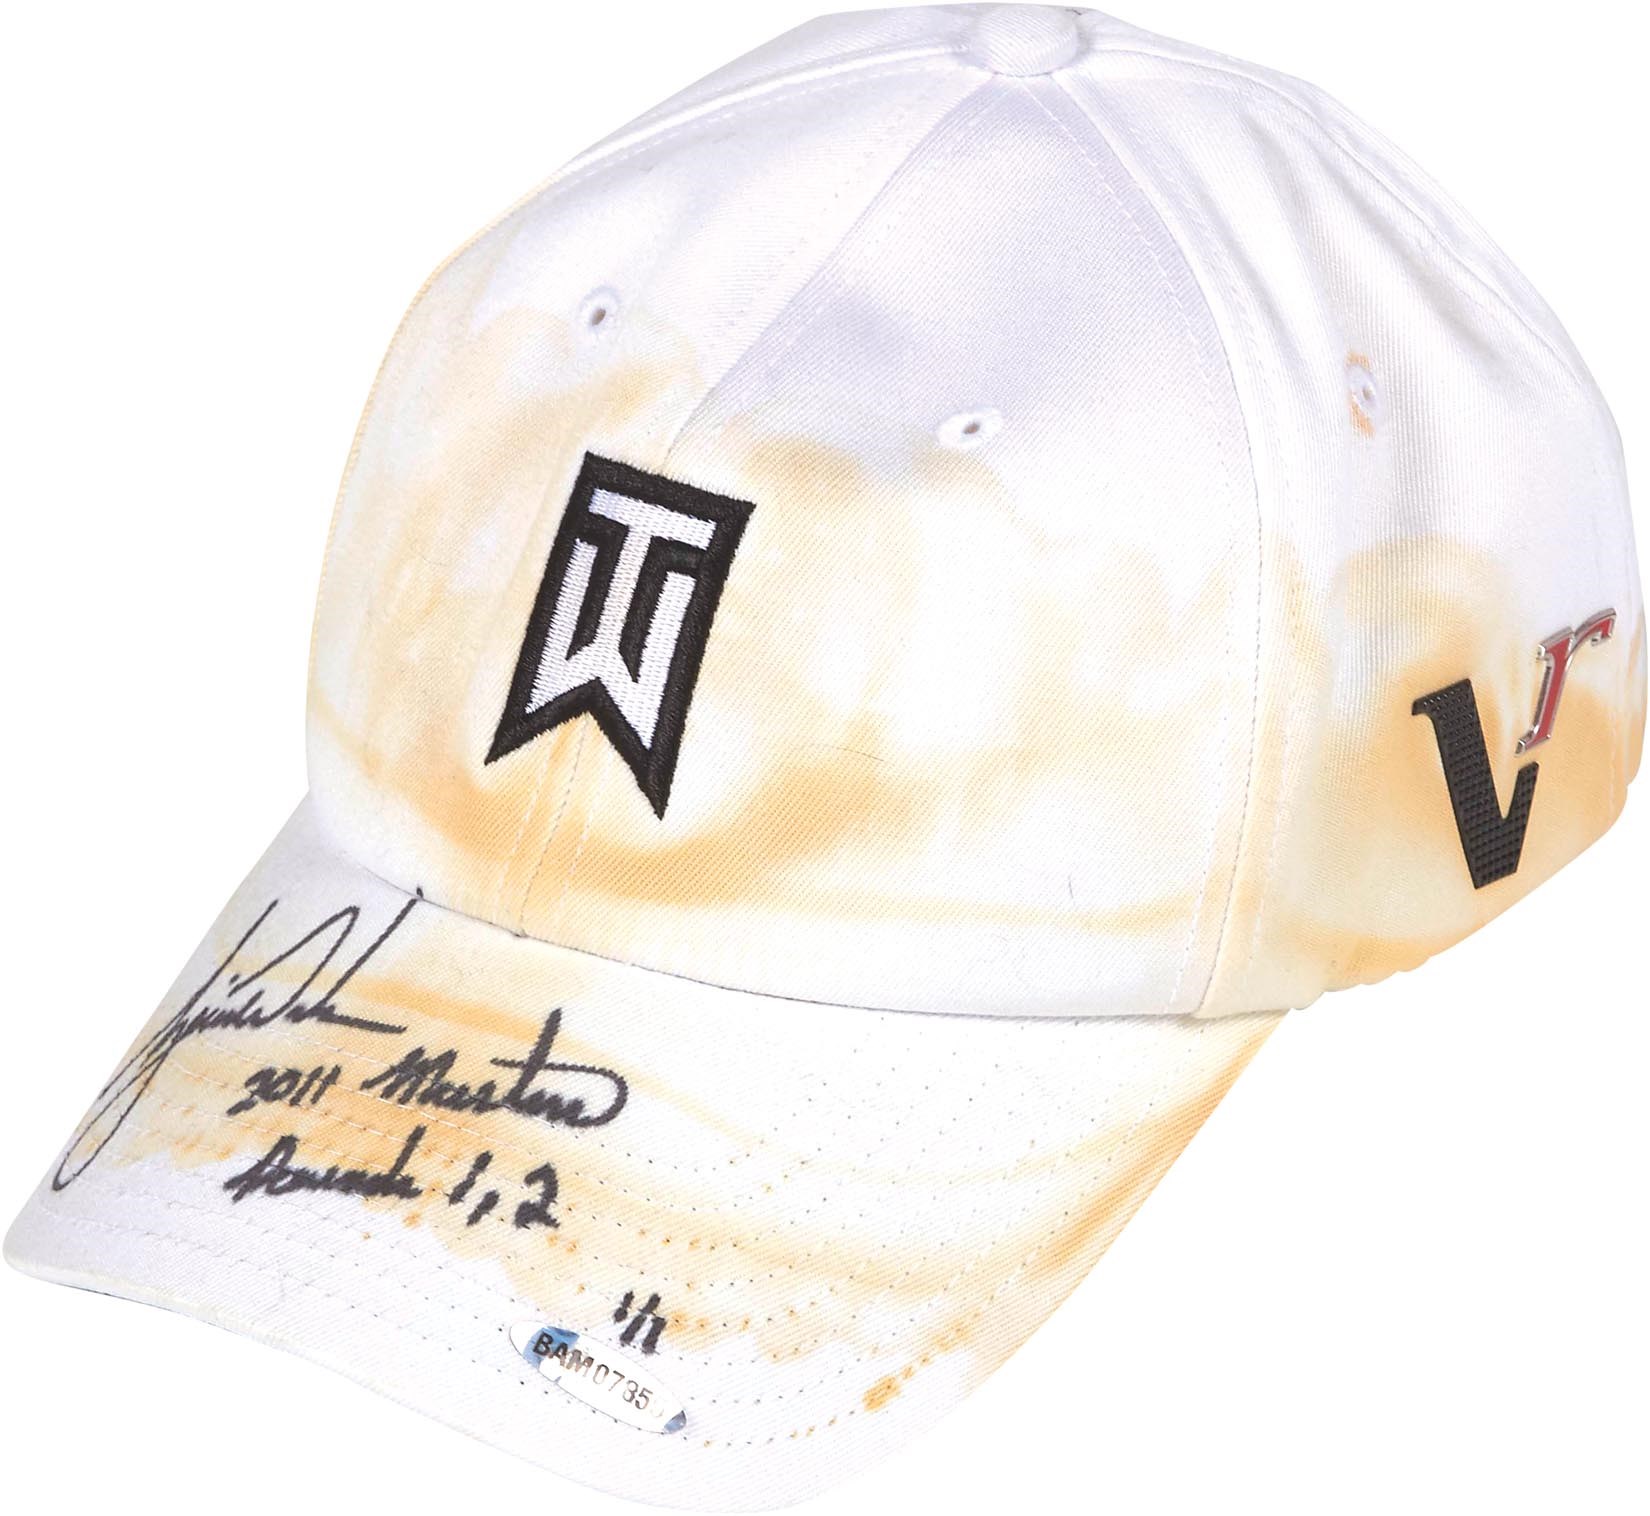 - 2011 Tigers Woods Masters Match Worn and Signed Cap (UDA 1/1)